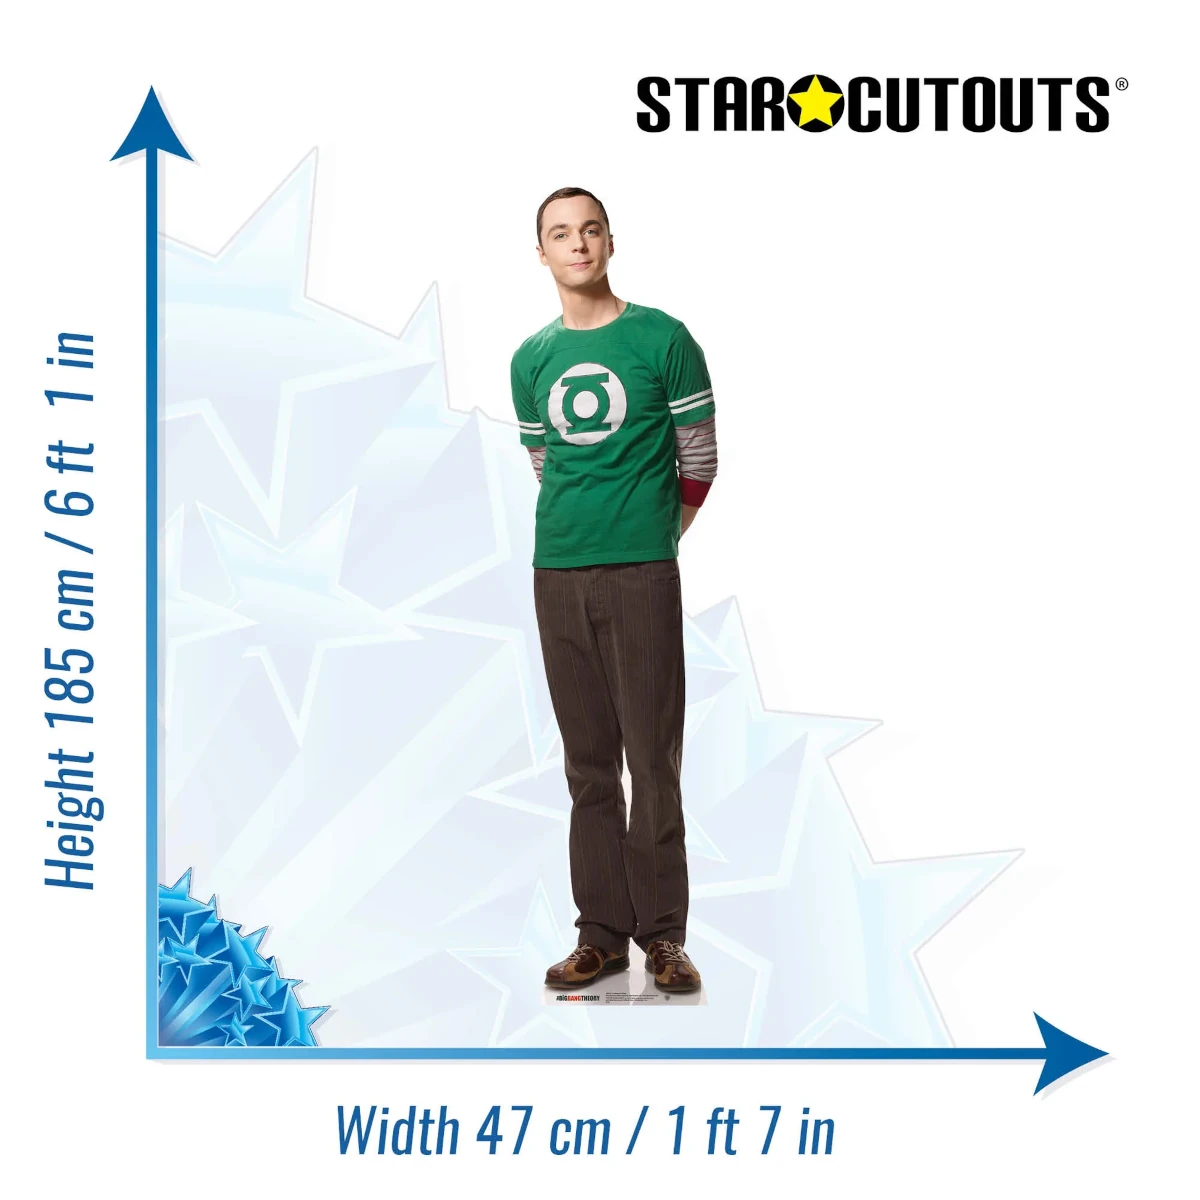 SC618 Dr Sheldon Cooper (The Big Bang Theory) Official Lifesize Cardboard Cutout Standee Size